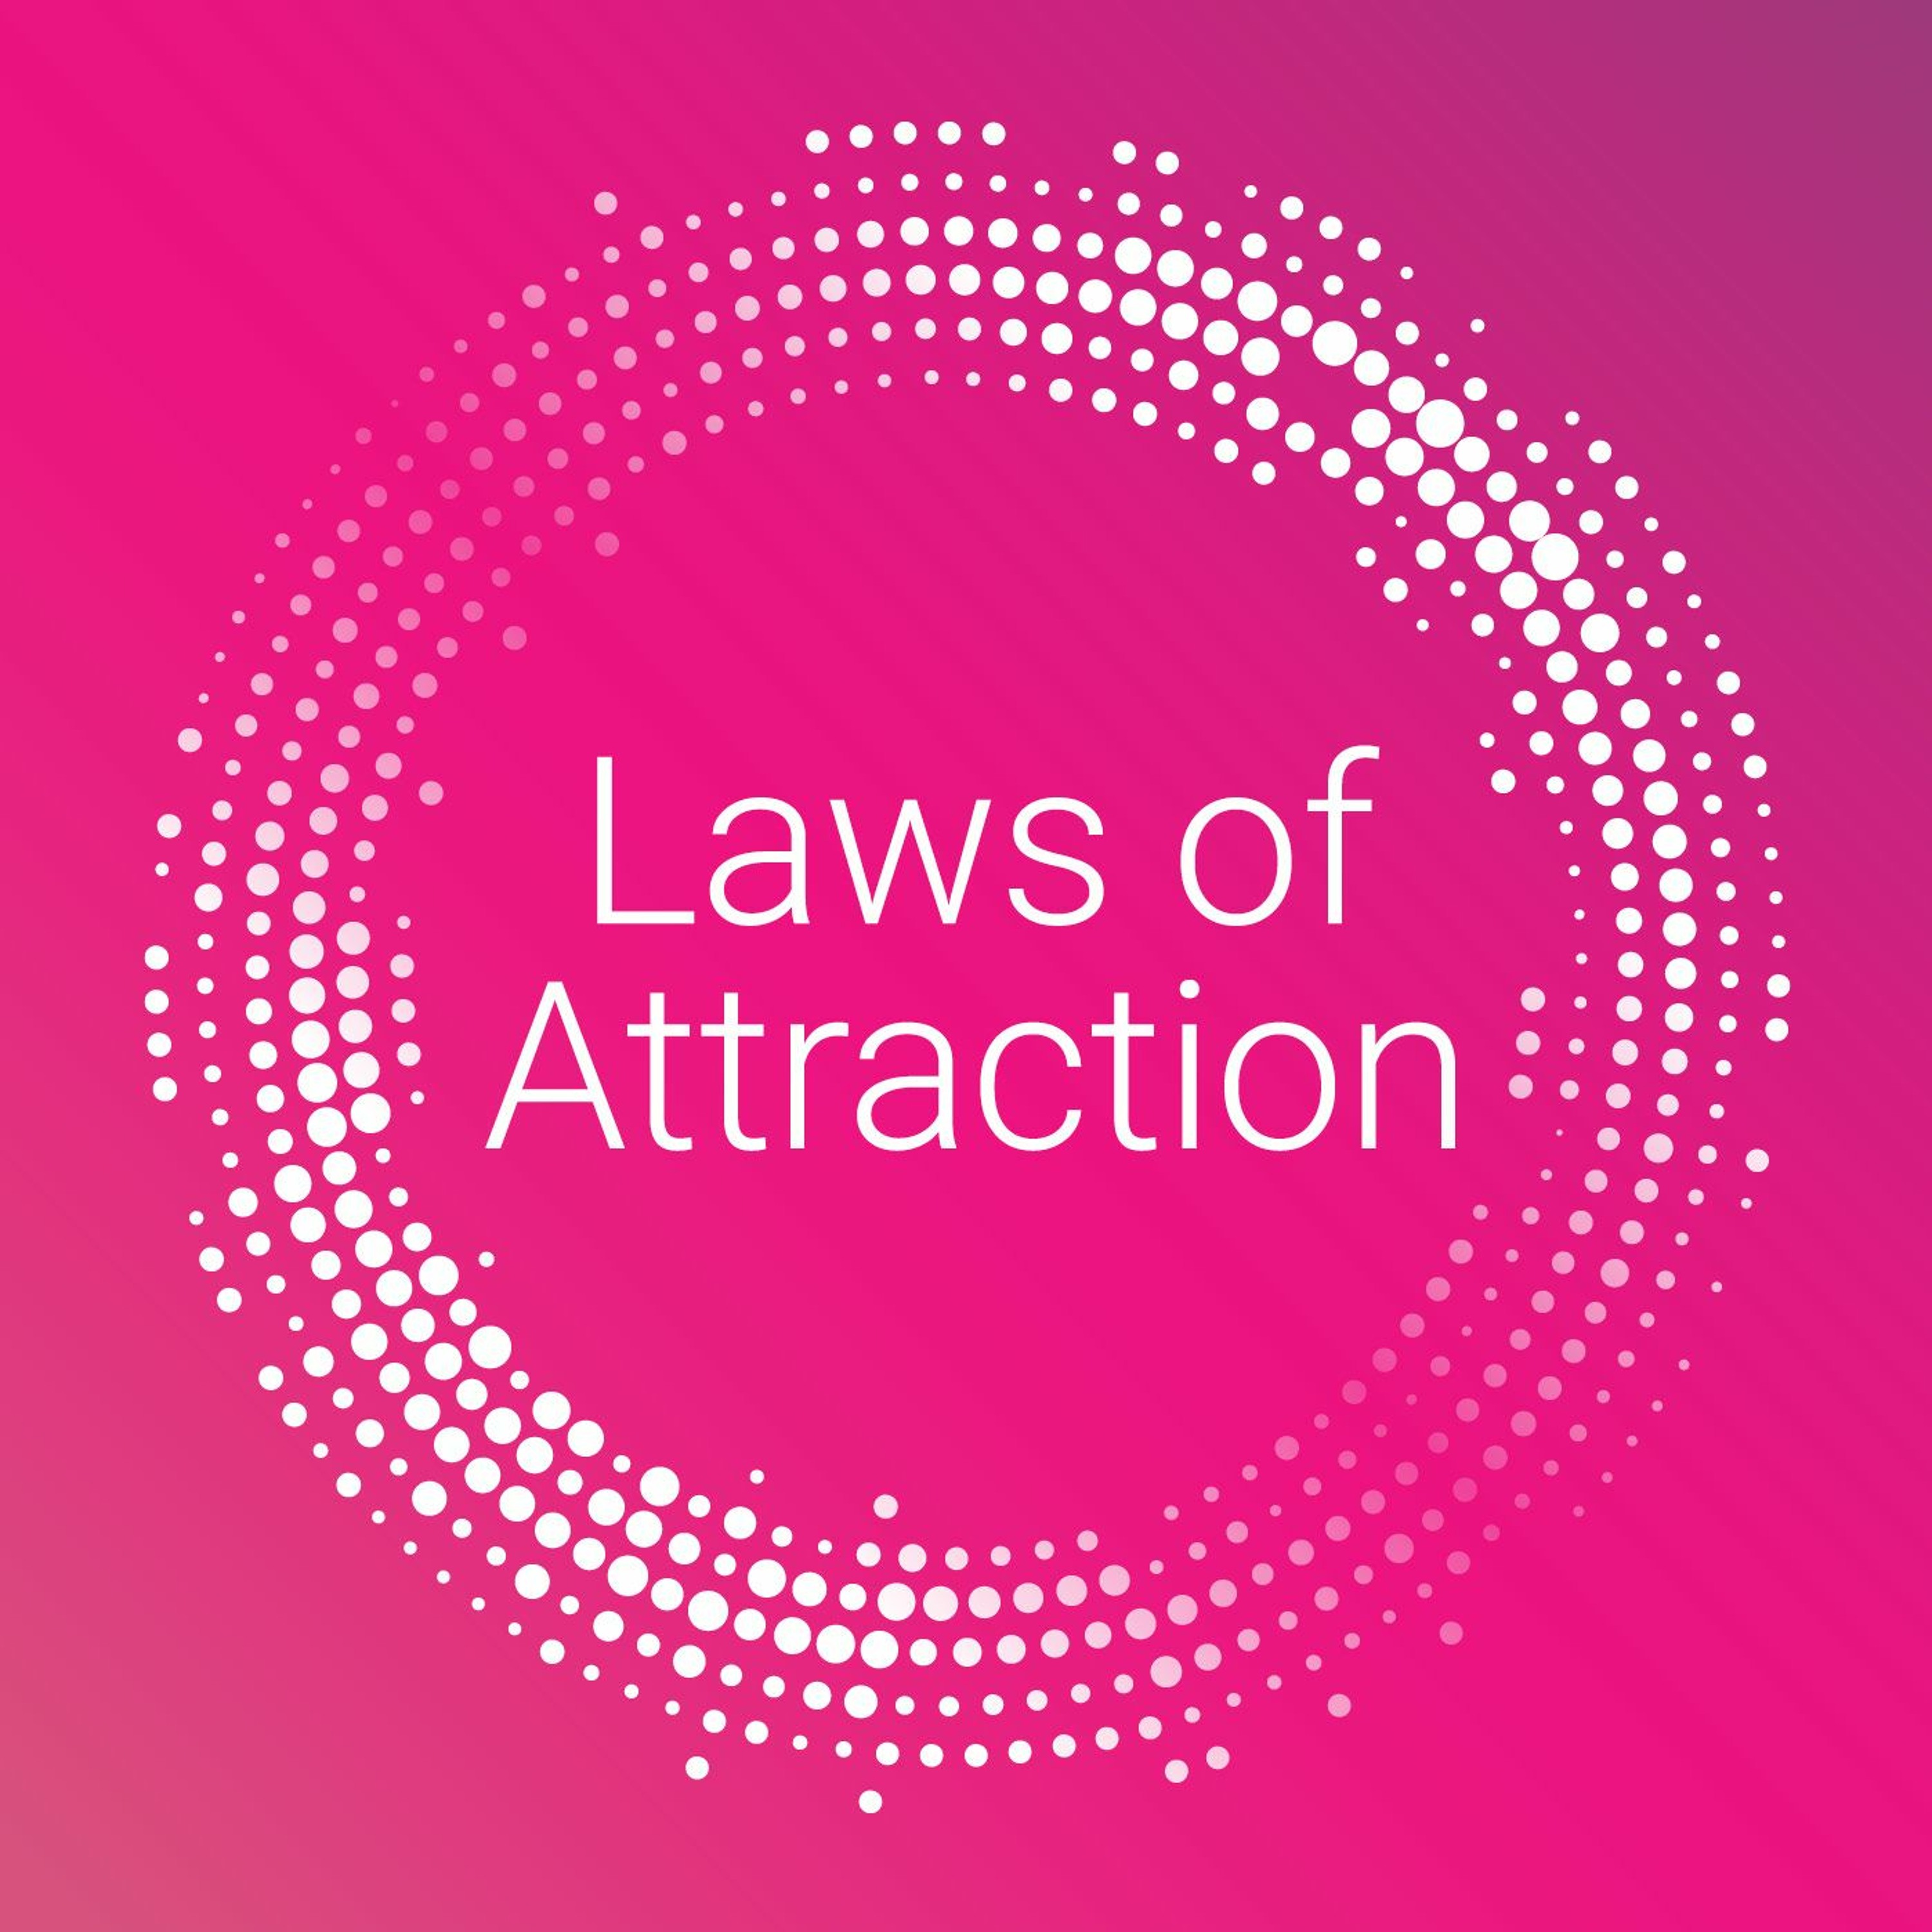 Laws of Attraction - Attracting Millennials